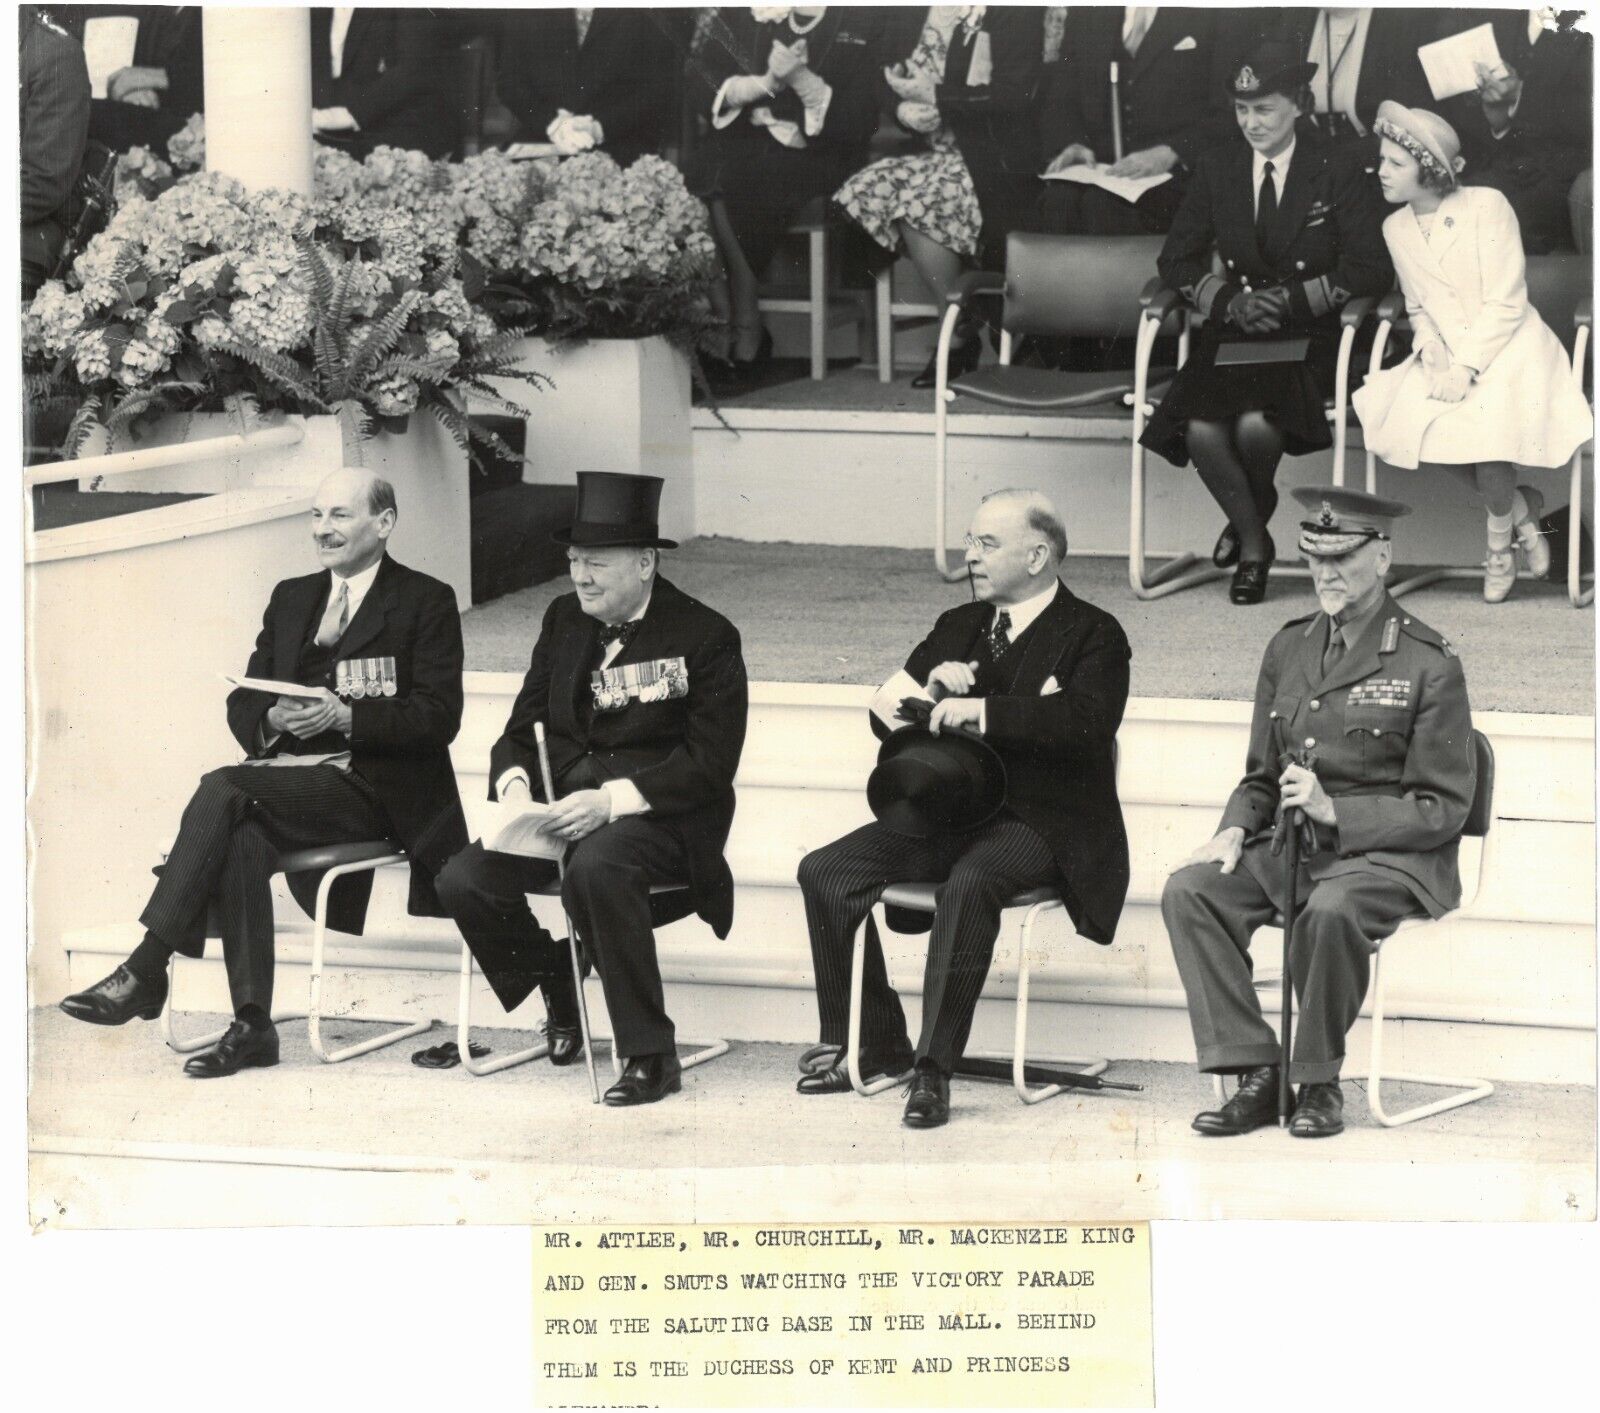 8 June 1946 press photo of Churchill and other leaders at V-Day celebrations